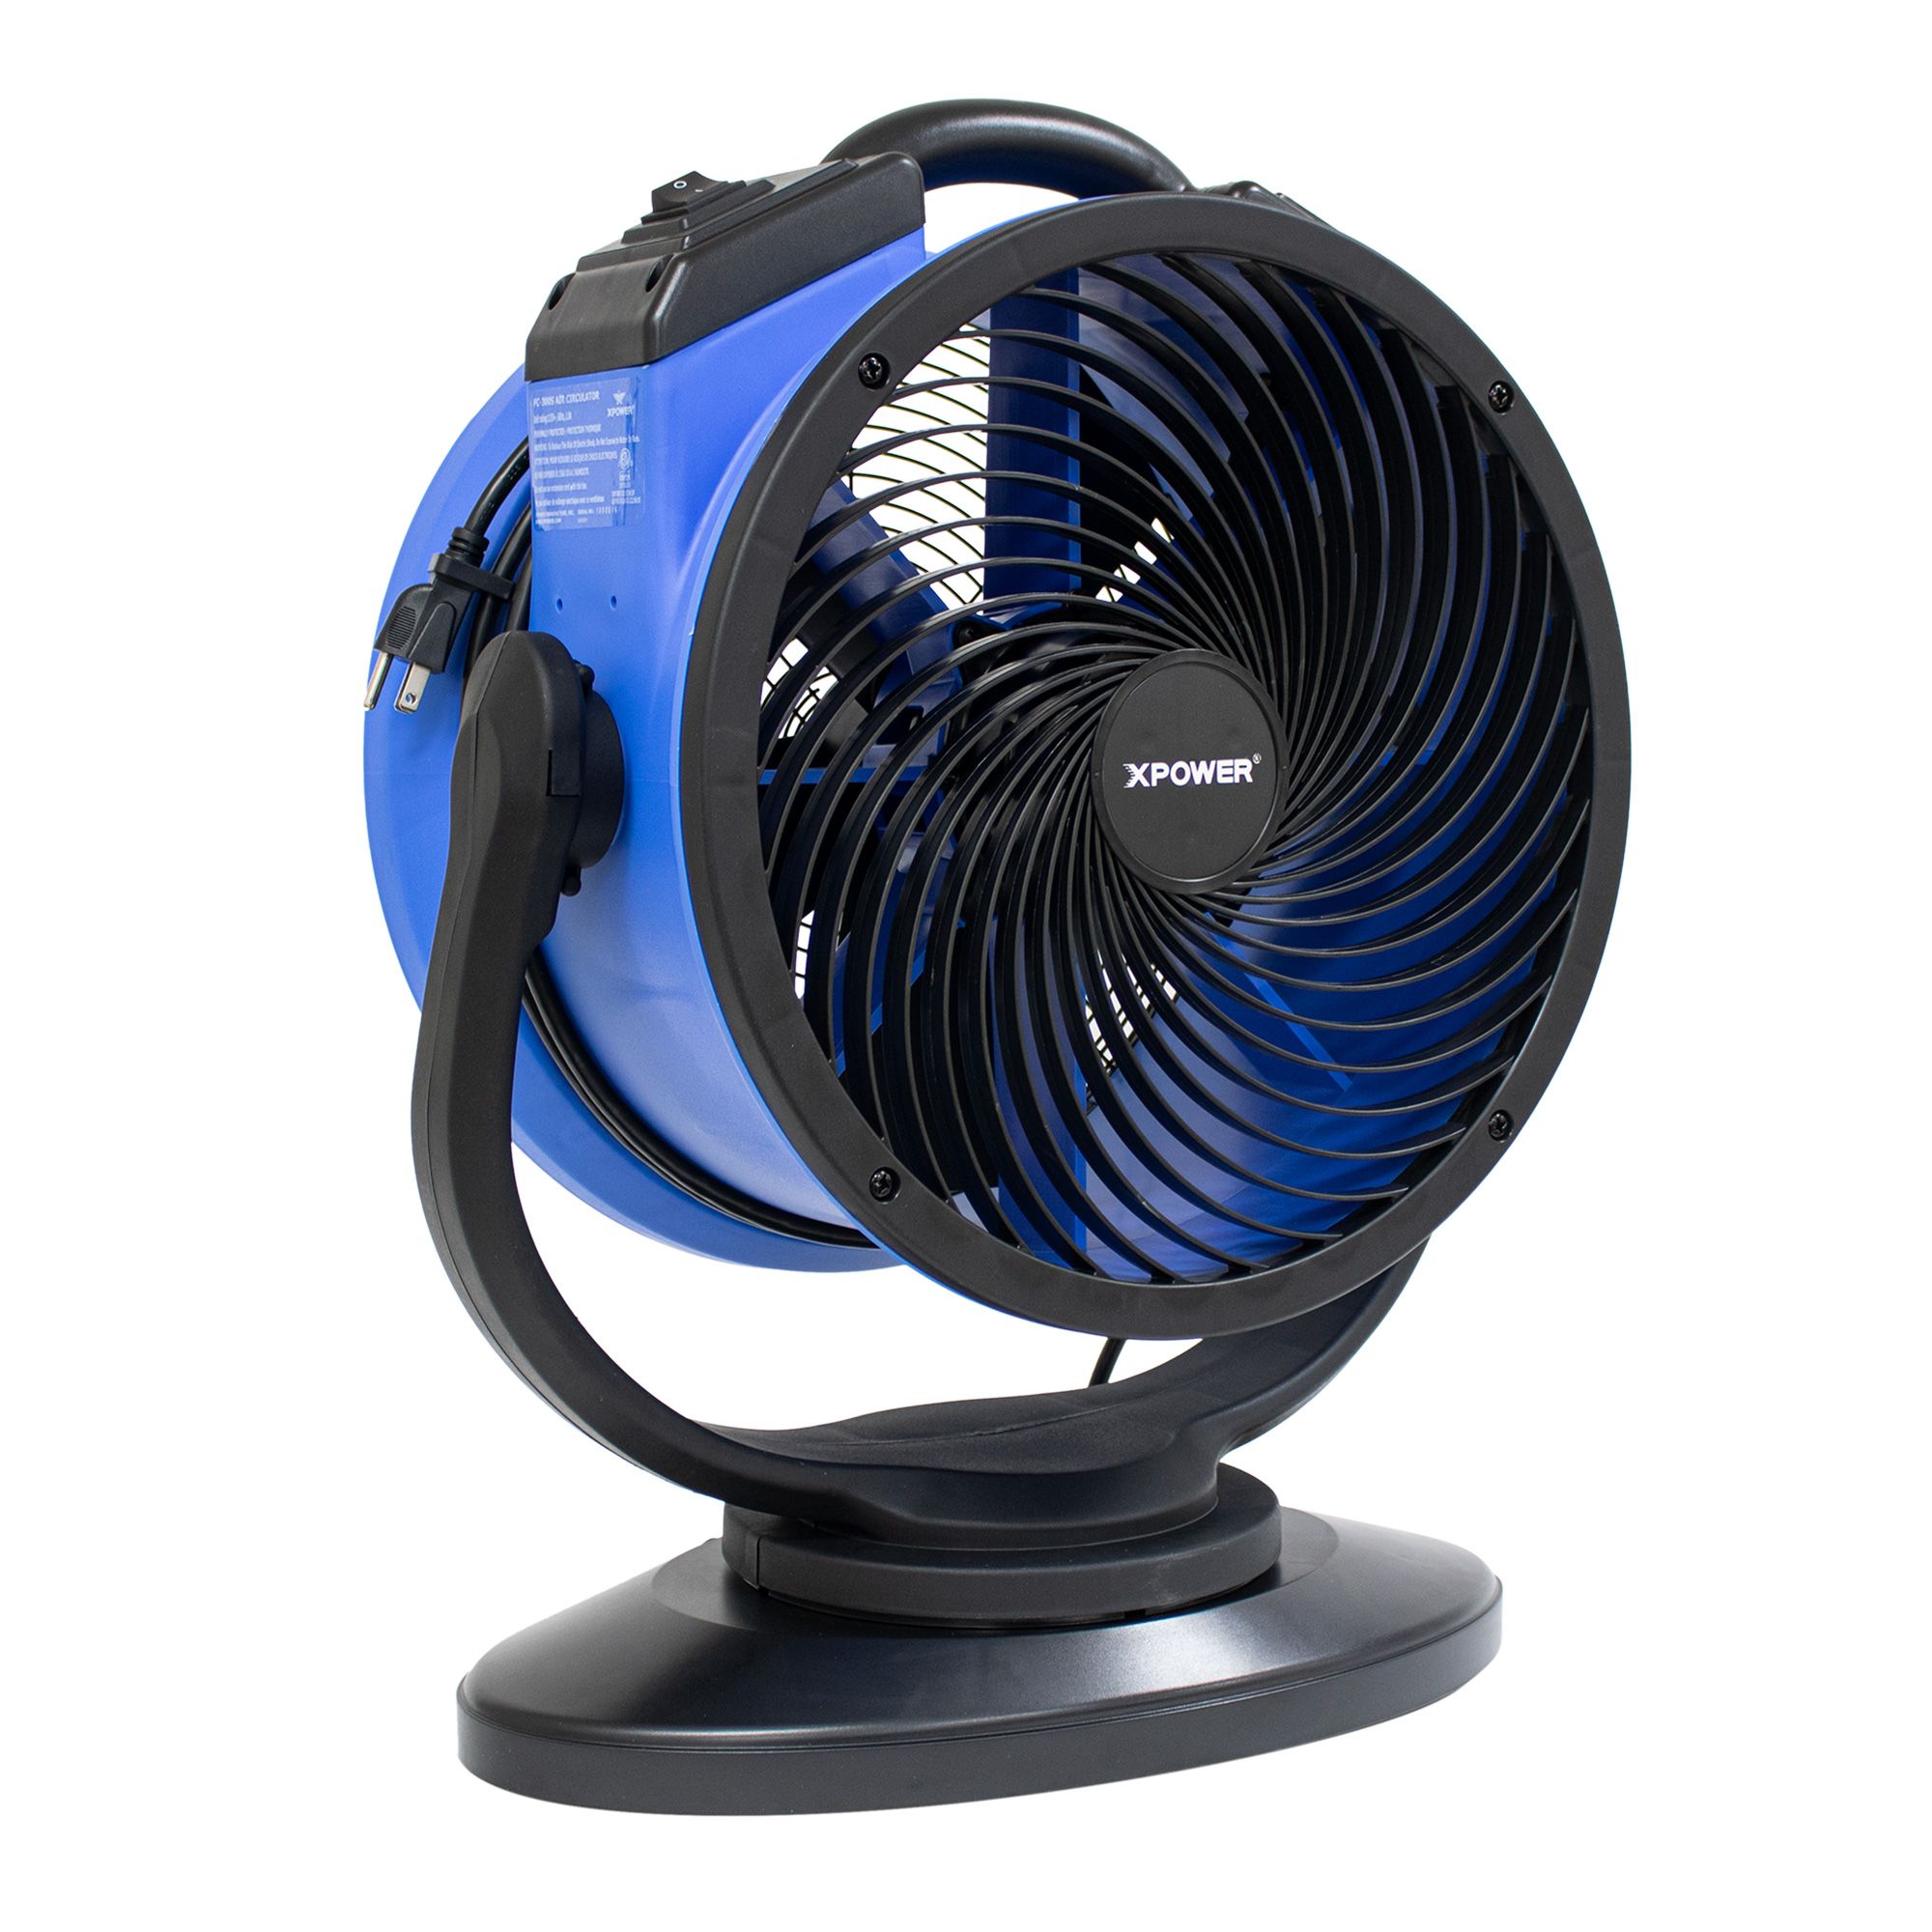 Picture of Xpower FC-300S 14 in. 2100 CFM 4 Speed Portable Multipurpose Heavy Duty Shop Fan Air Circulator Fan with Oscillating Feature